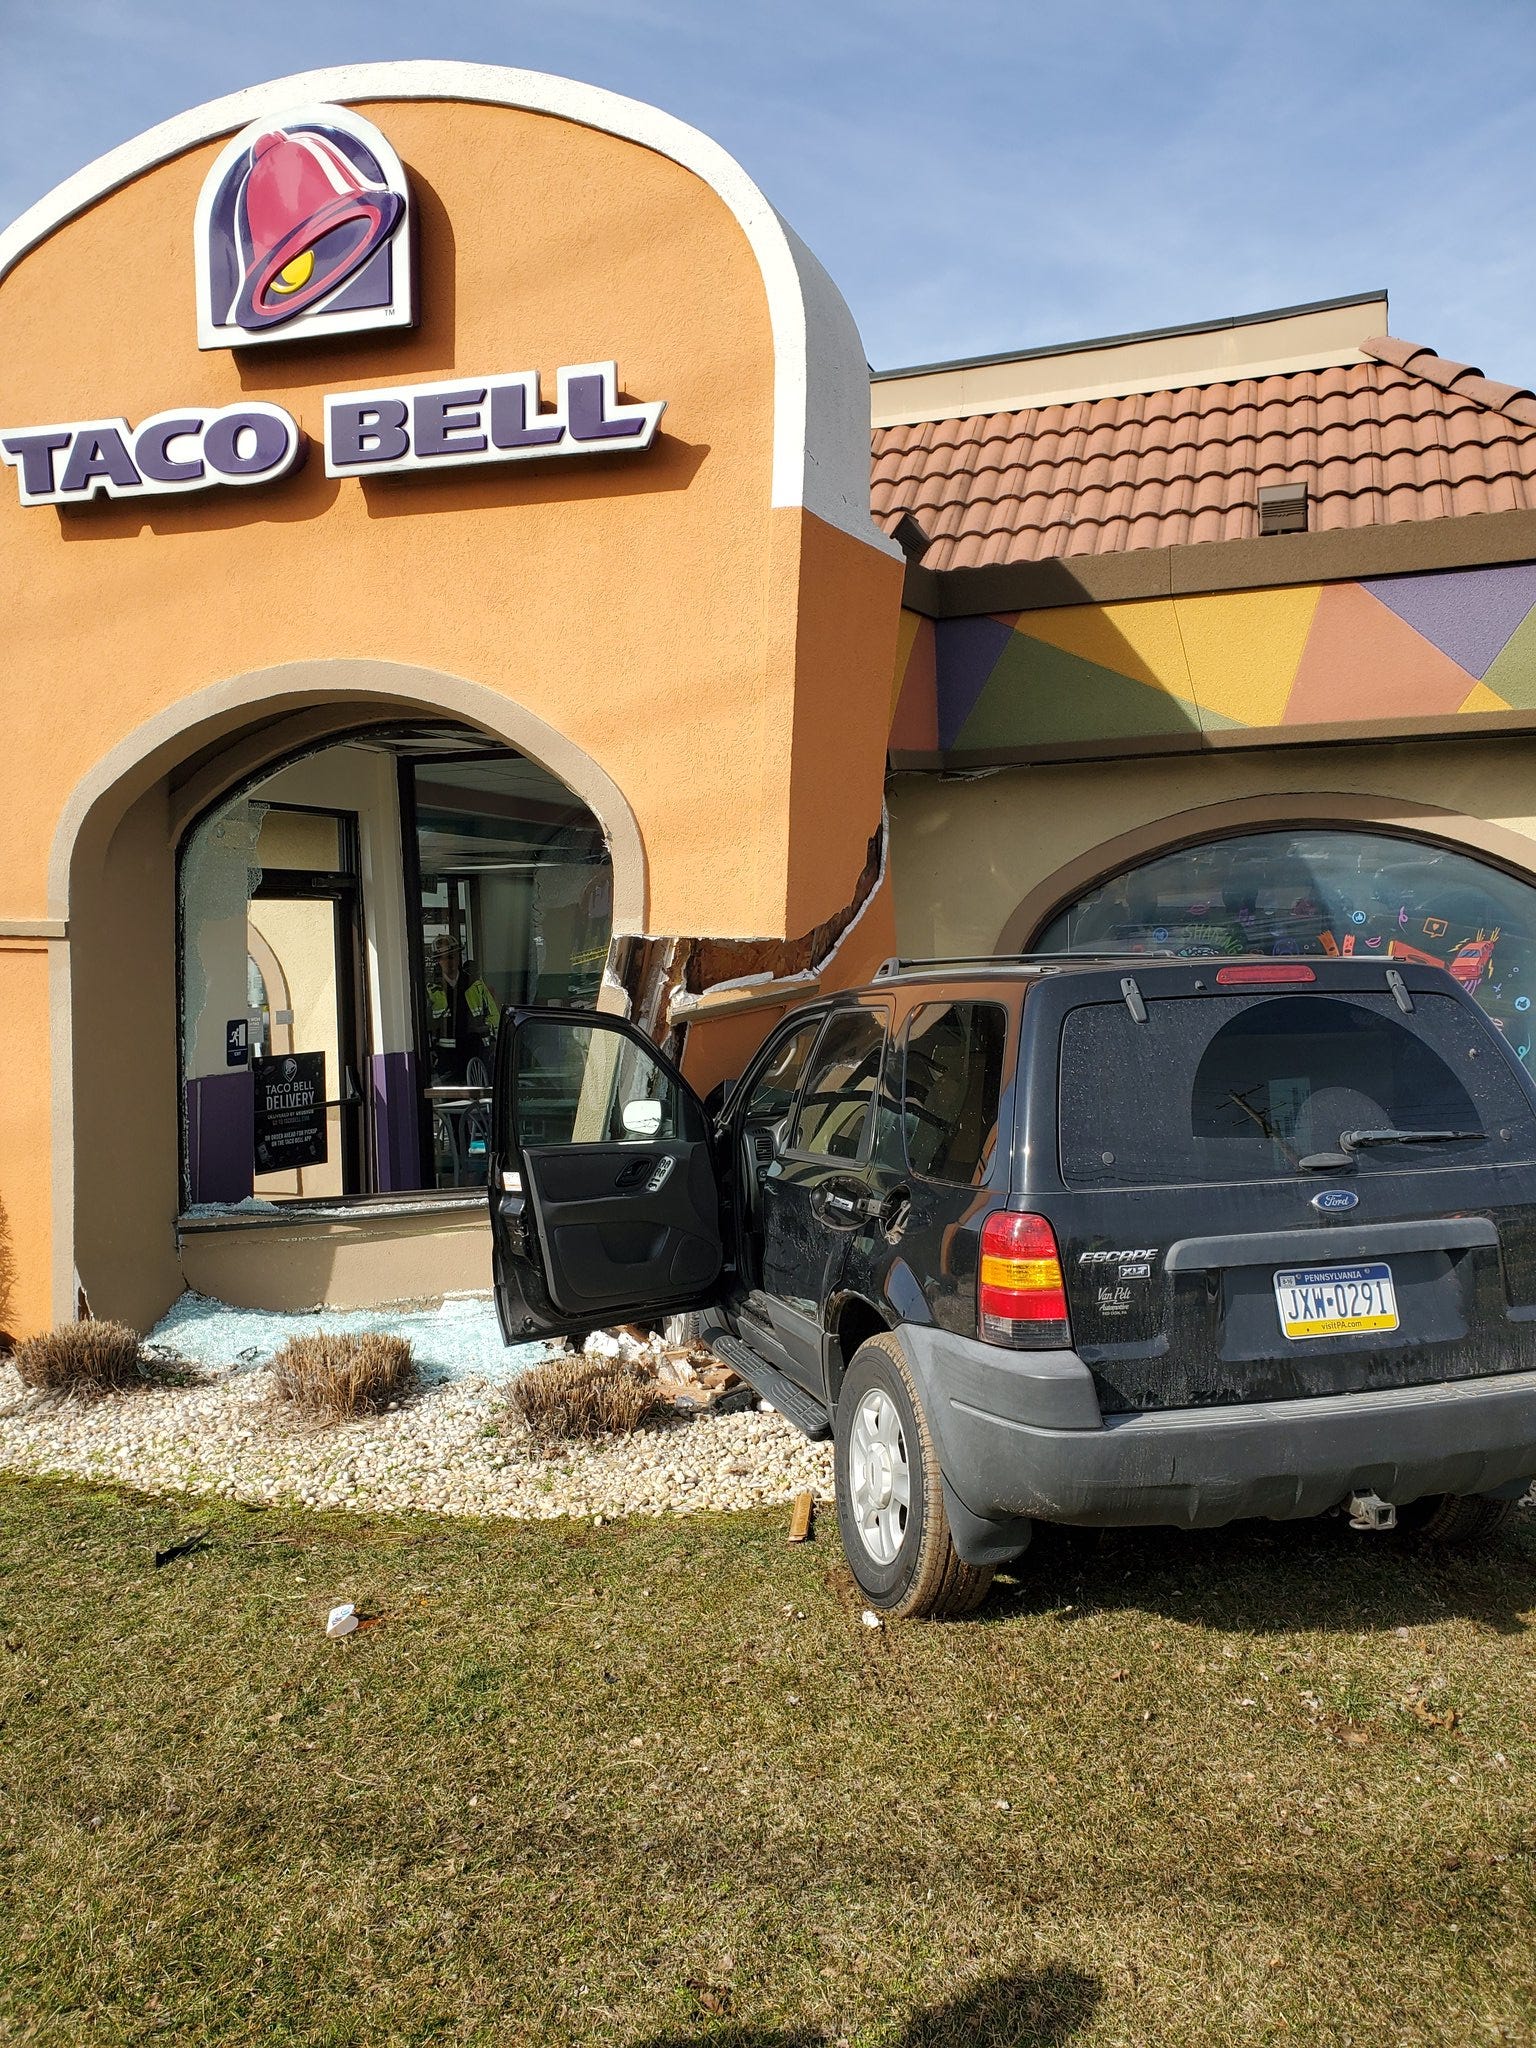 An SUV driven by Jessica Winand crashed into the Taco Bell in Manchester Township just after noon on Saturday, Feb. 15, 2020, according to Northern Regional Police, who allege Winand was huffing a canister of compressed air before crashing with her two 3-year-old sons in her SUV.